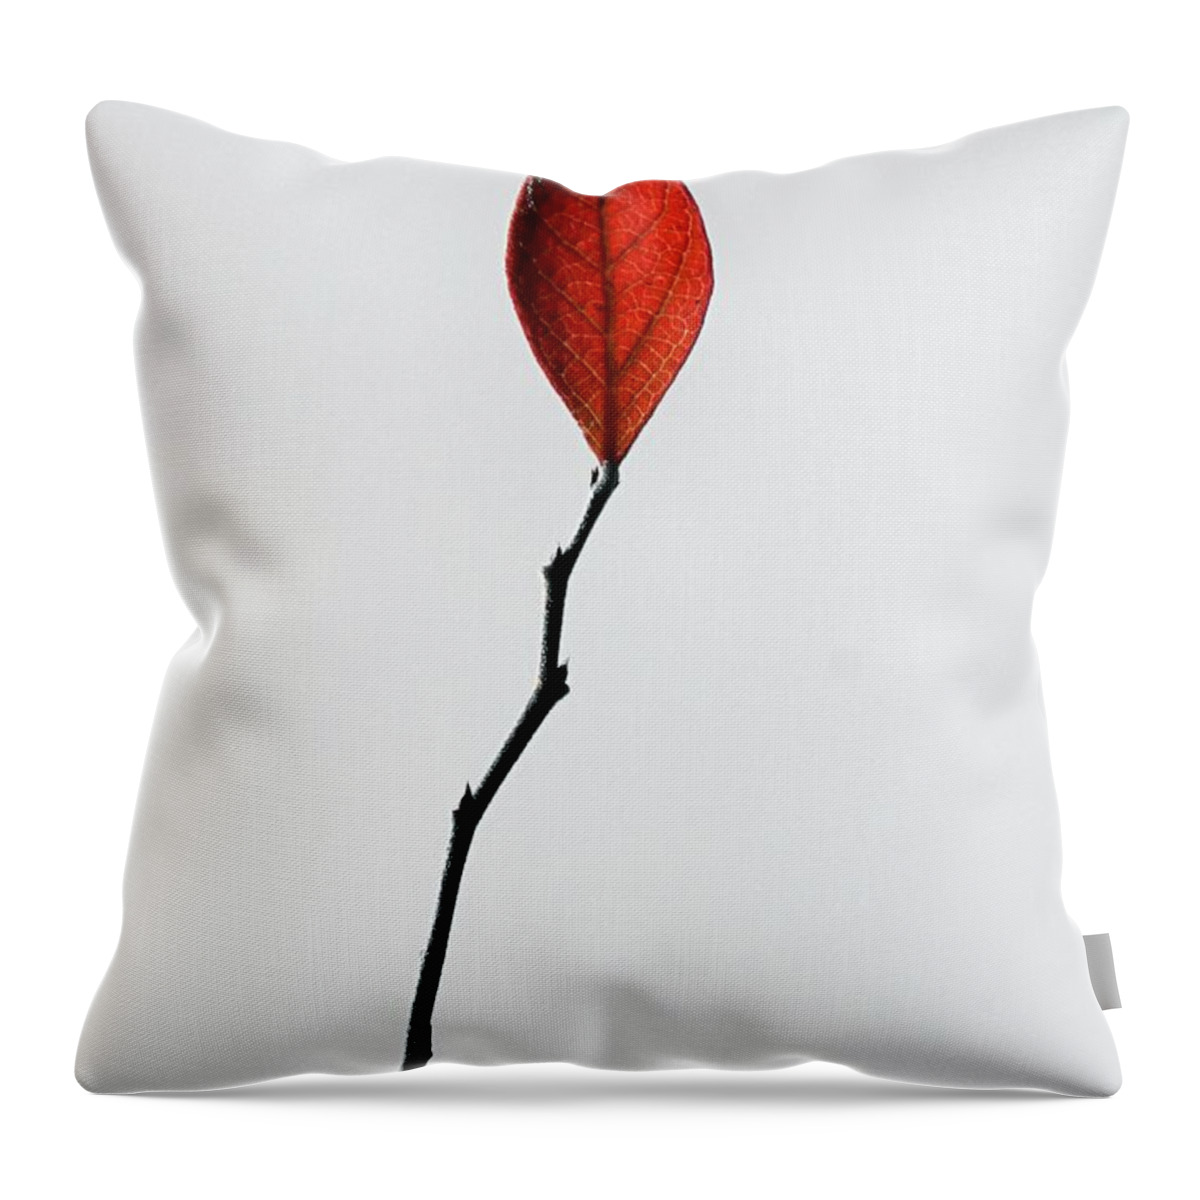 One Throw Pillow featuring the photograph Red Leaf by Sharon Woerner